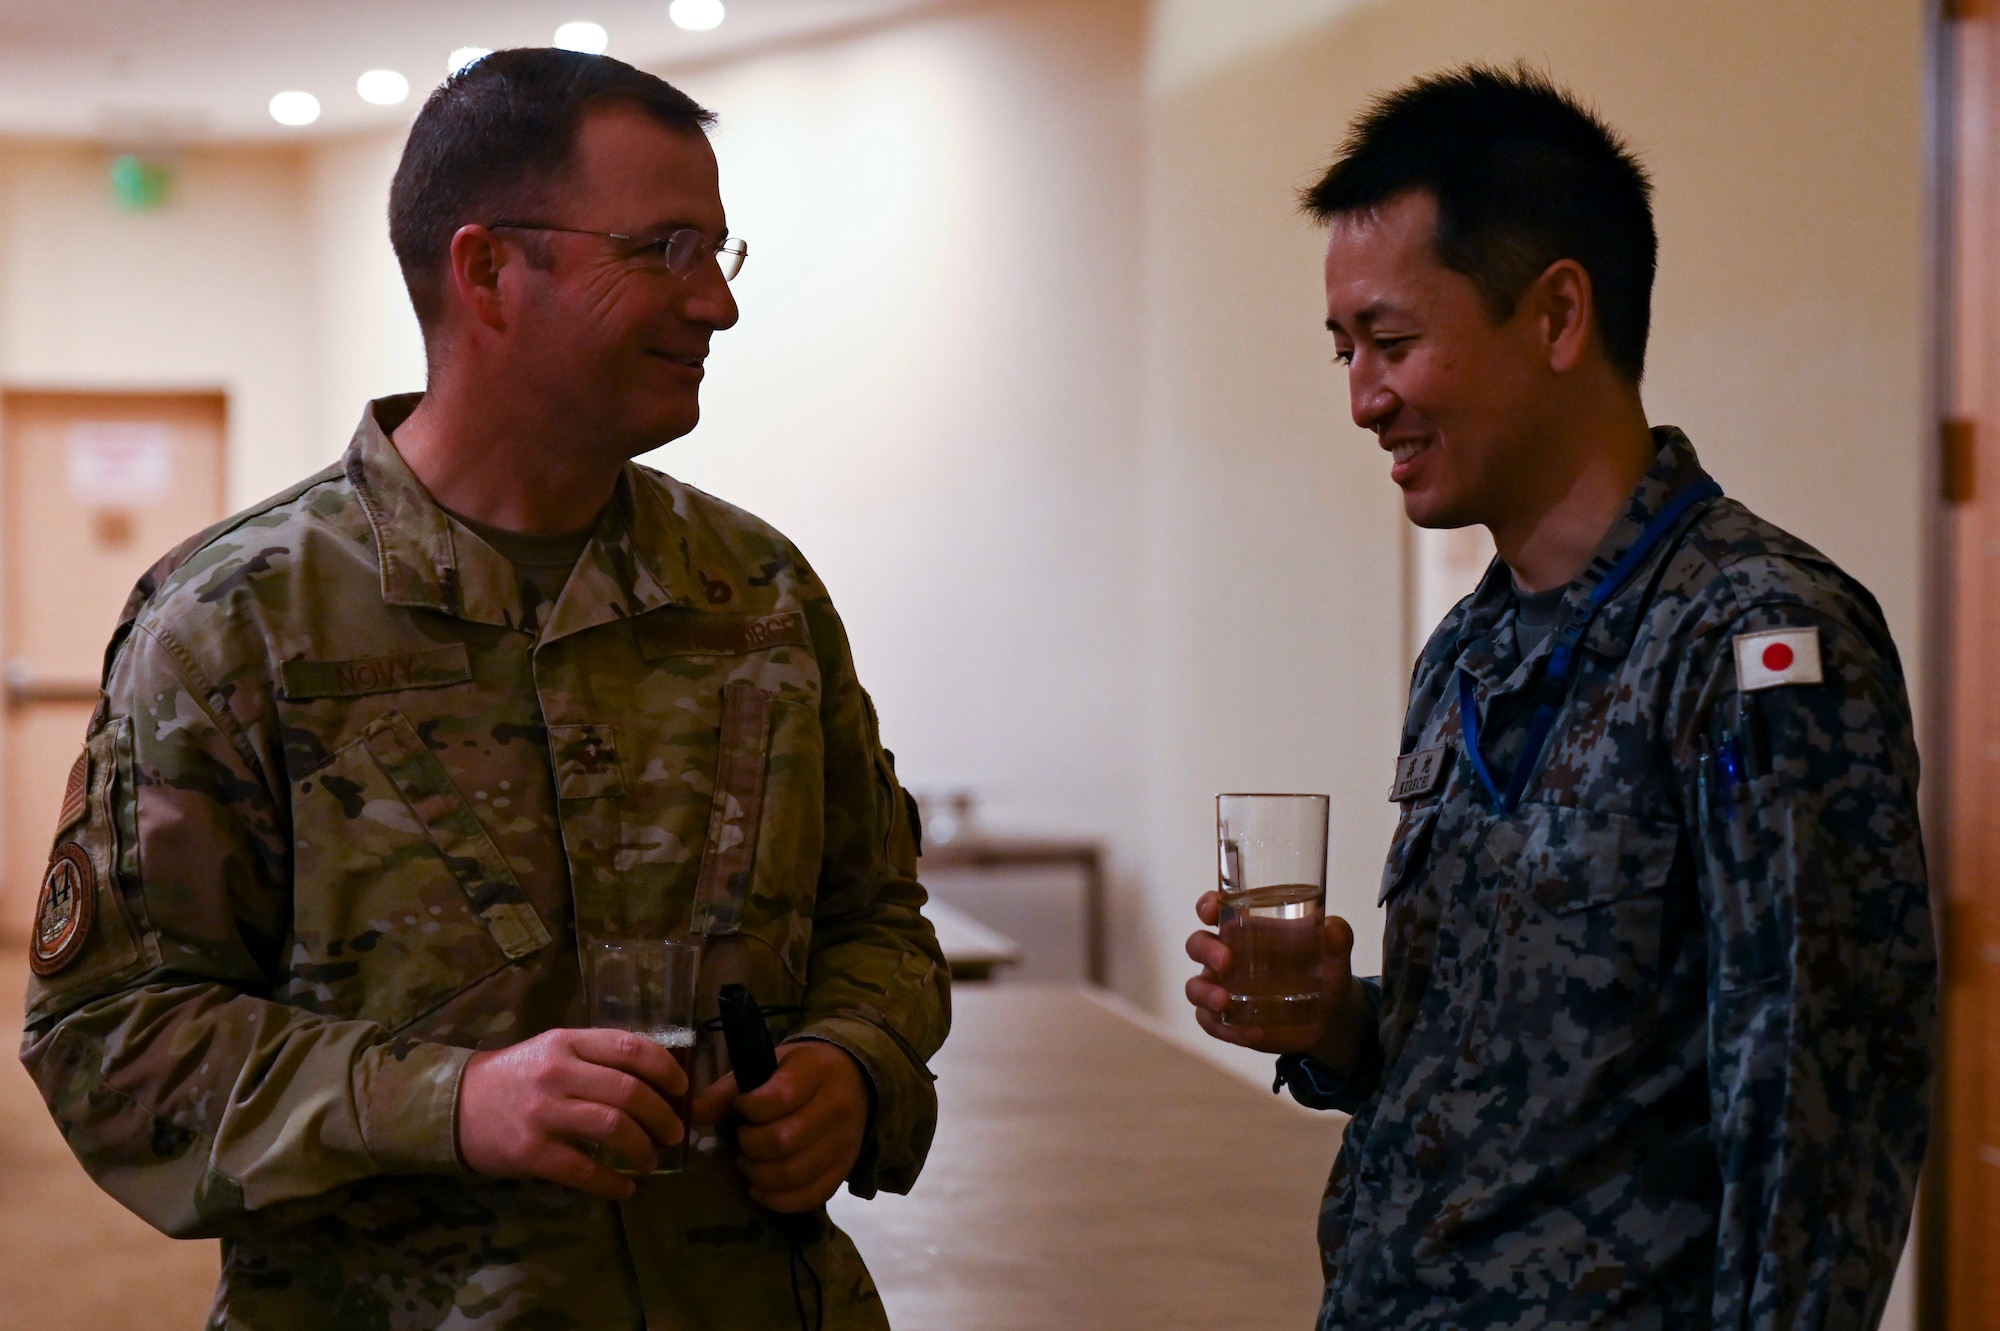 U.S. Air Force Col. David Novy, Chief of the Civil Engineer Division, Pacific Air Forces, talks with a member of the Japan Air Self-Defense Force during the Pacific Unity Multi-Lateral Key Leader Engagement, June 24, 2022 at Andersen Air Force Base, Guam. Themes during this KLE included topics of shared interest across the allies and partners such as joint capabilities, leveraging expertise in the Total Force, and increased frequency of subject matter expert exchanges and multi-lateral training. (U.S. Air Force Photo by Airman 1st Class Emily Saxton)